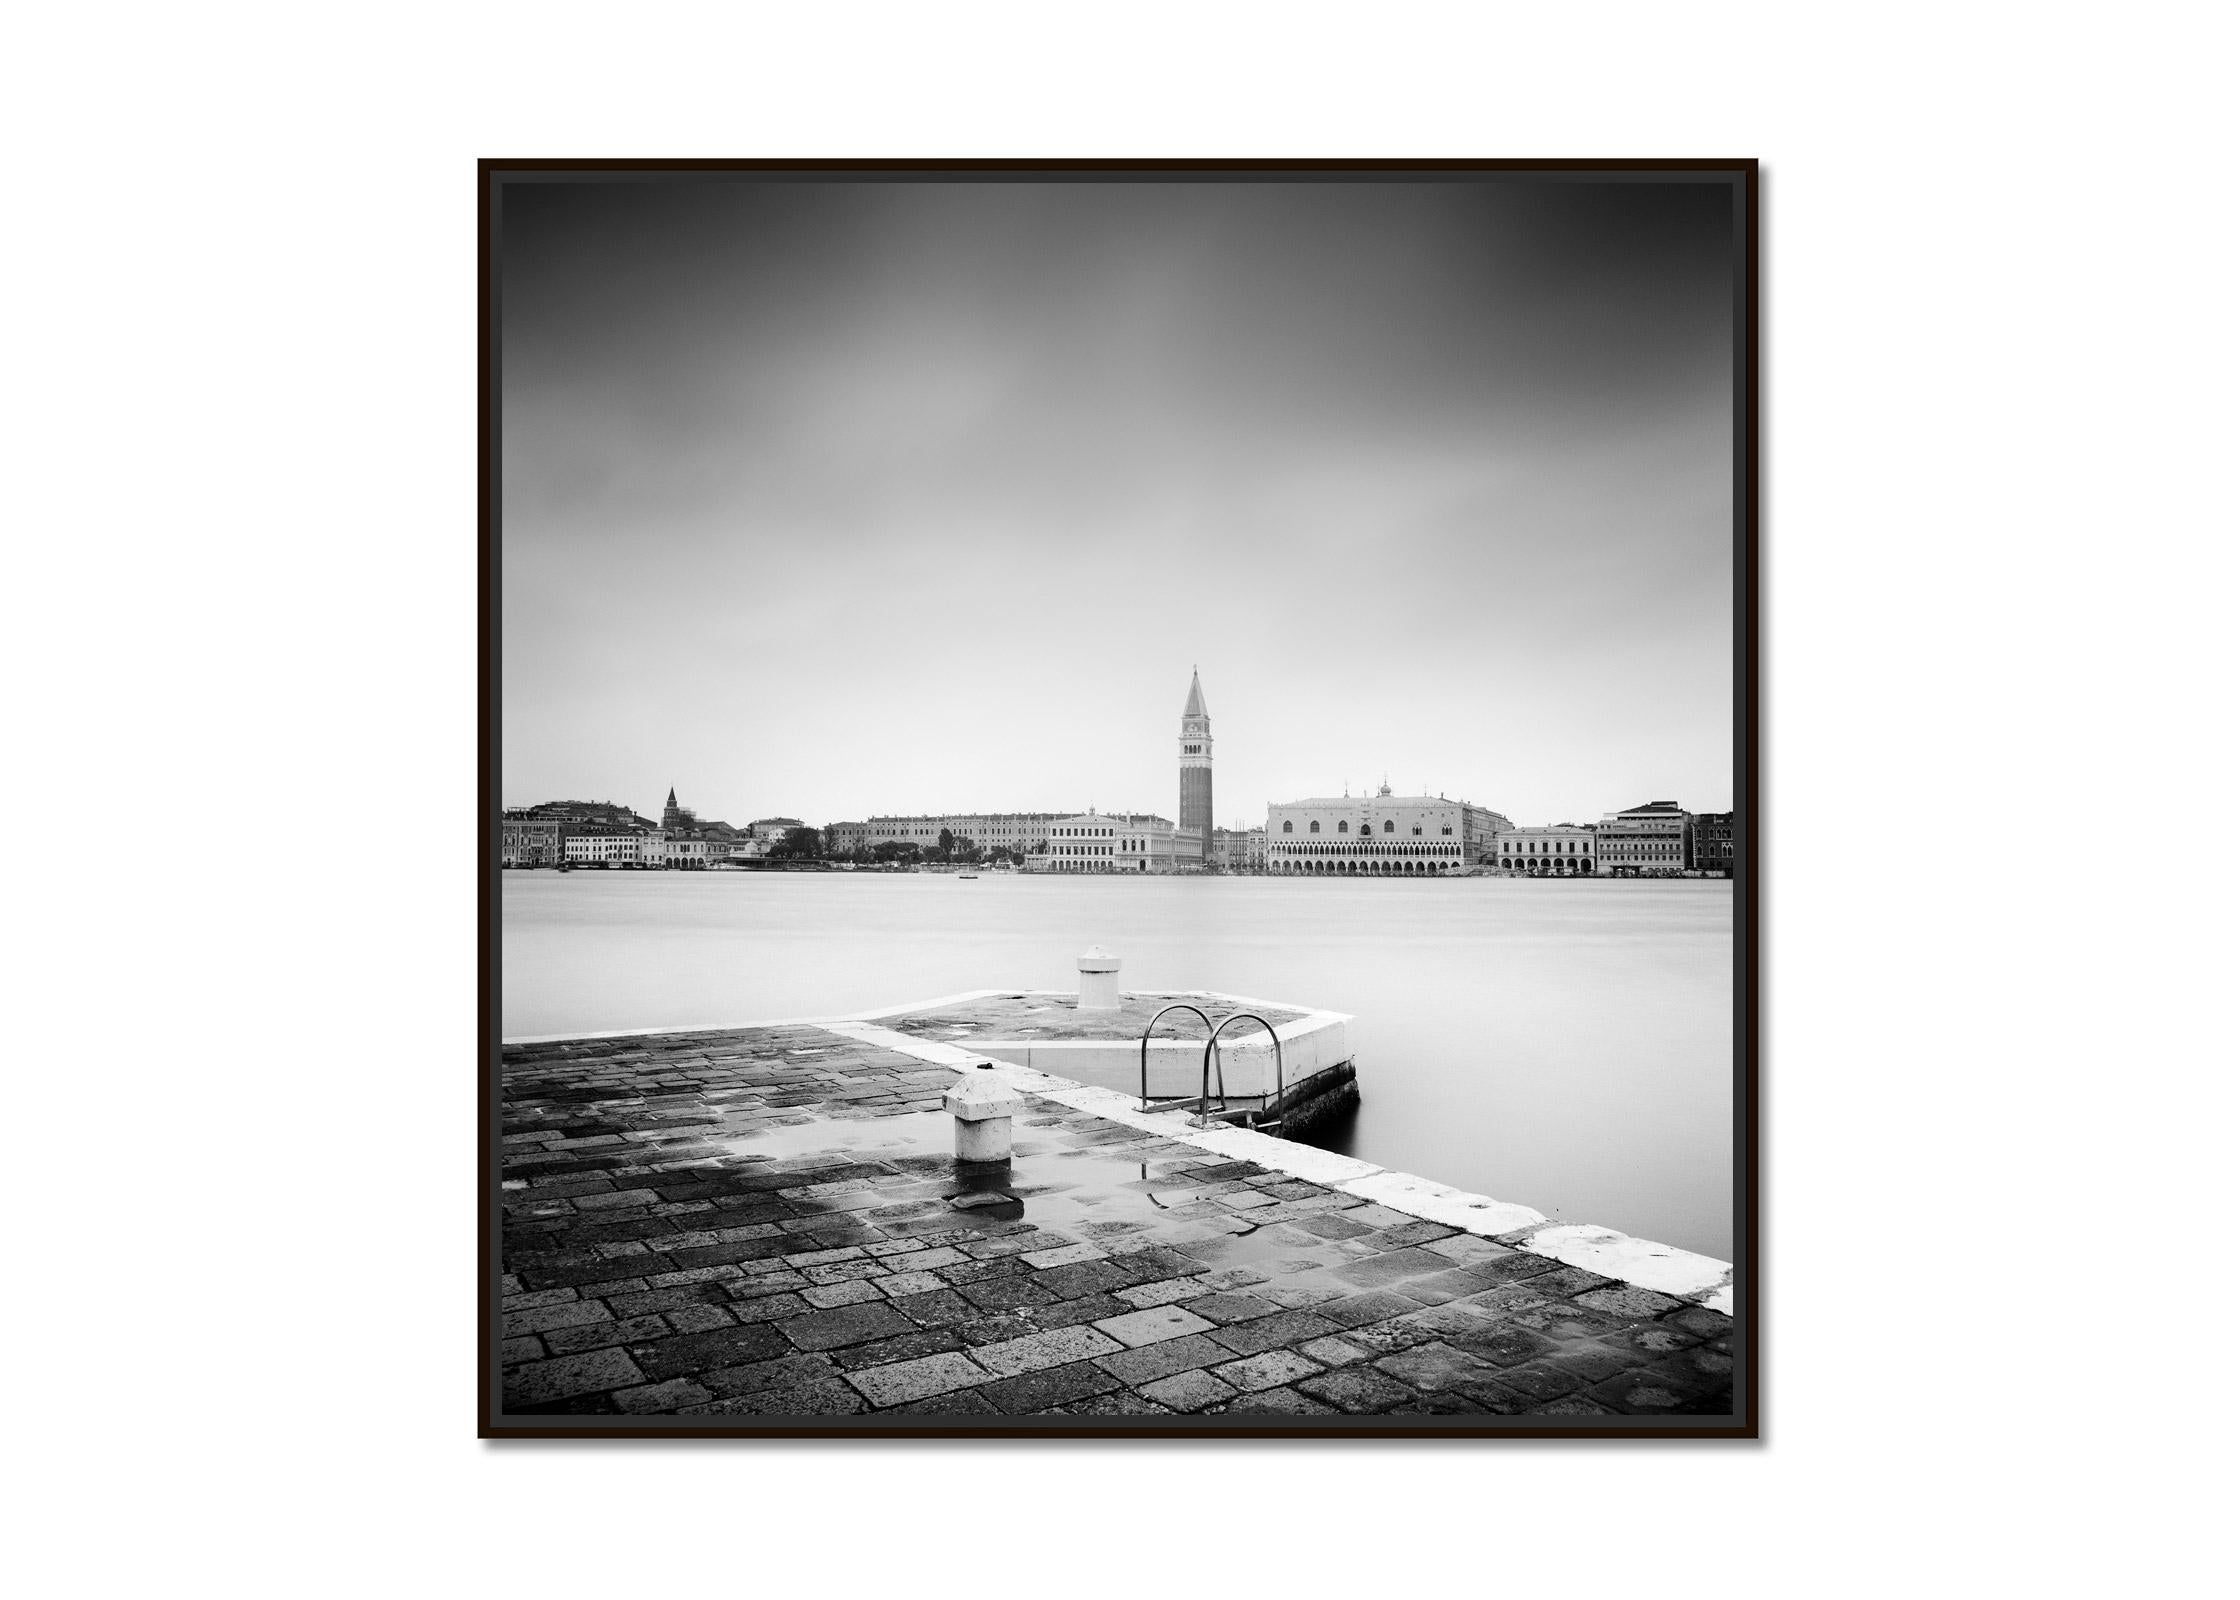 Palazzo Ducale, Venice, Italy, black and white photography, fine art, landscape - Photograph by Gerald Berghammer